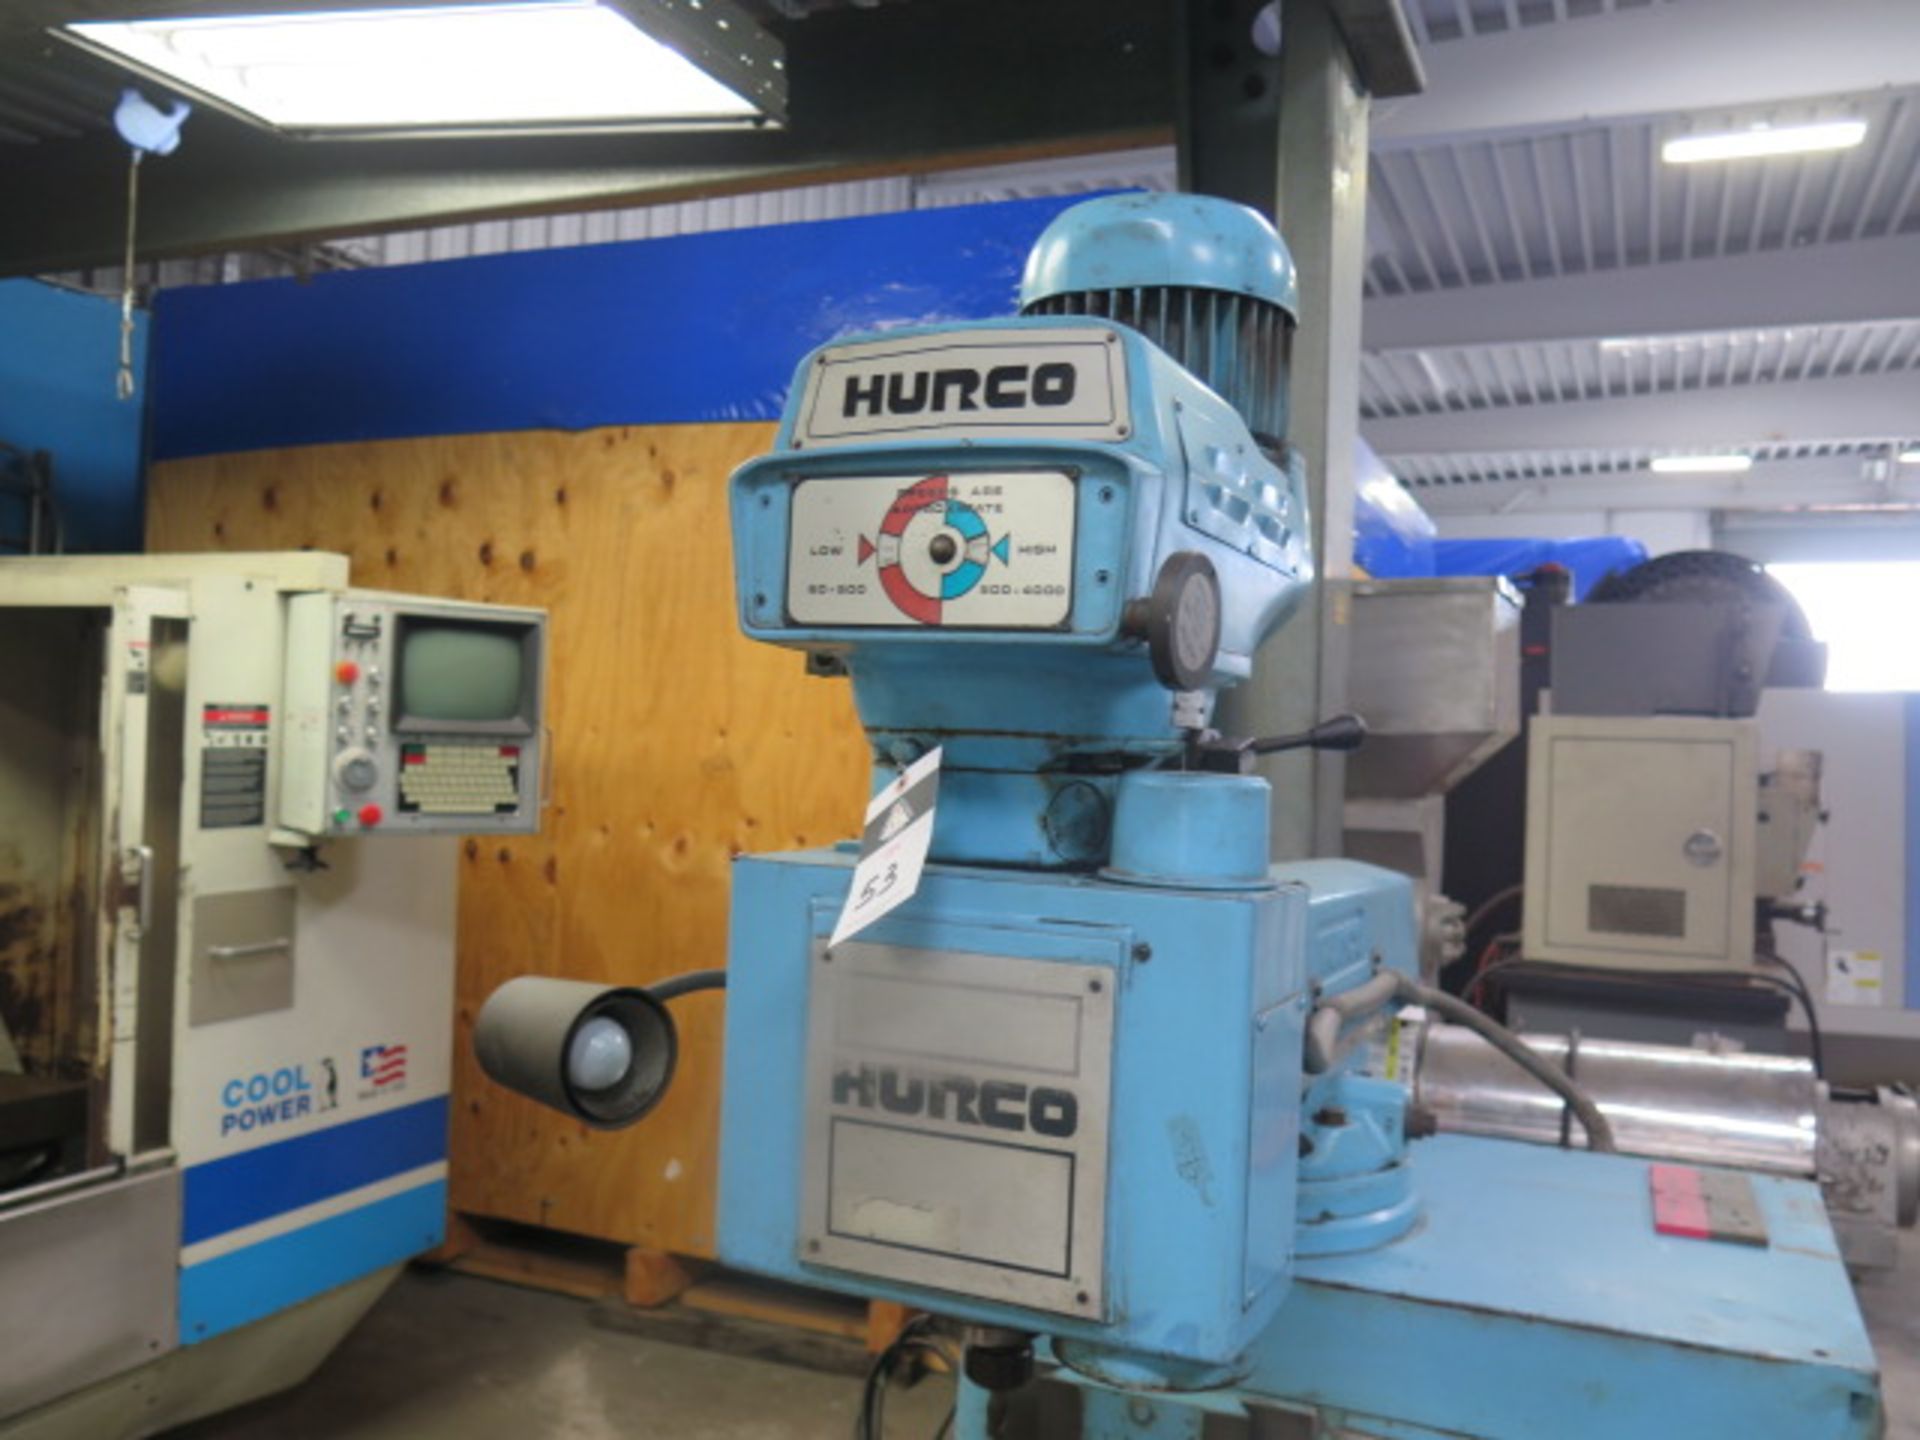 Hurco 3-Axis CNC Vertical Mill s/n SDX-8016074A w/ Centroid Controls, 60-4200 Dial RPM, SOLD AS IS - Image 5 of 12